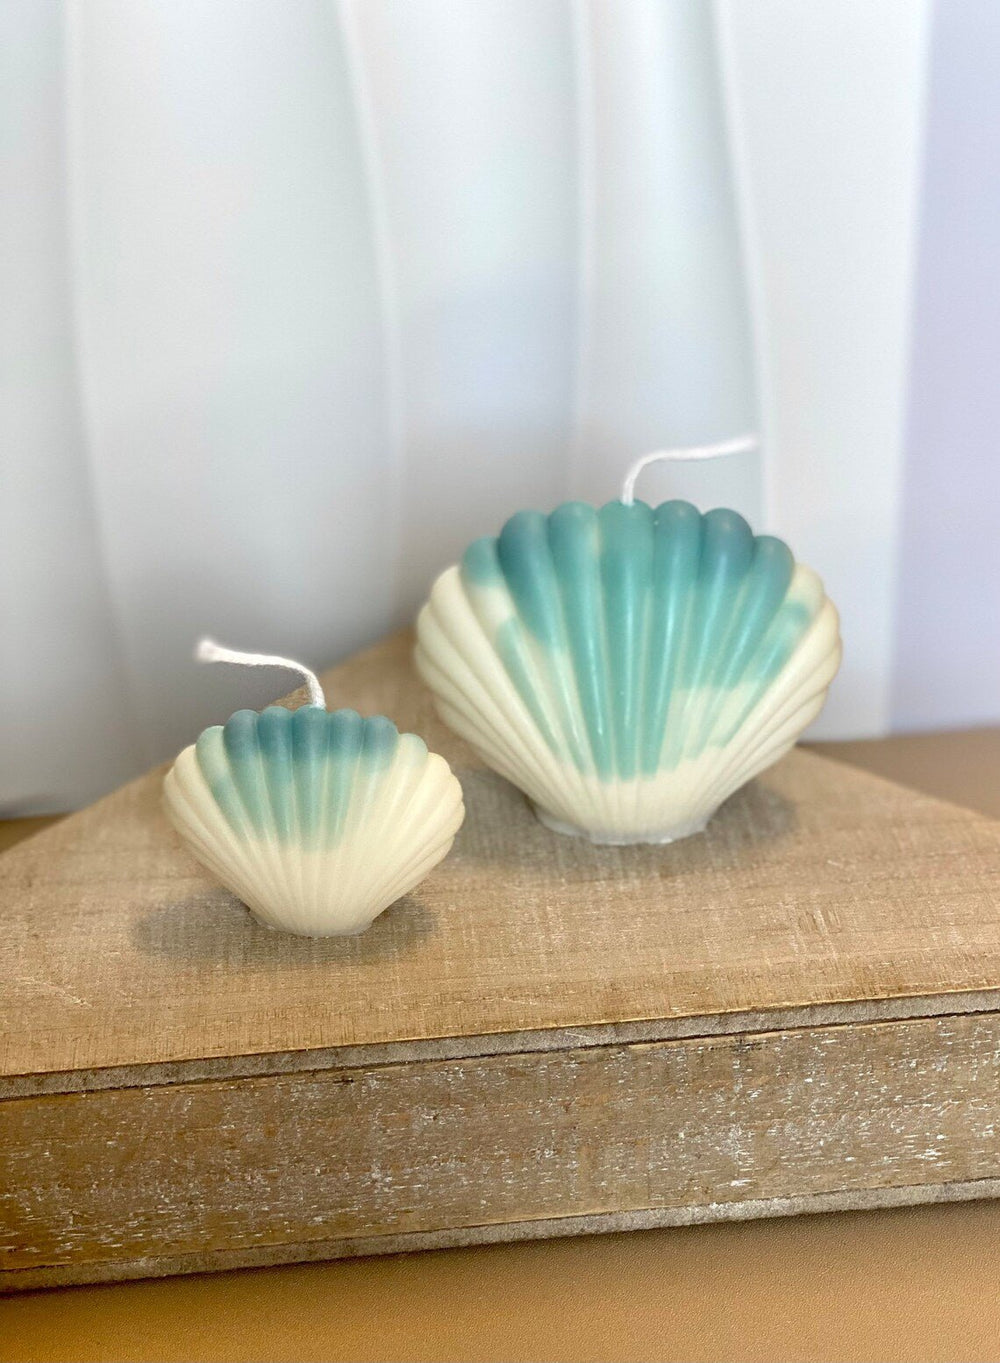 Handmade Soy Wax Shell Candles - Crazy About Candles